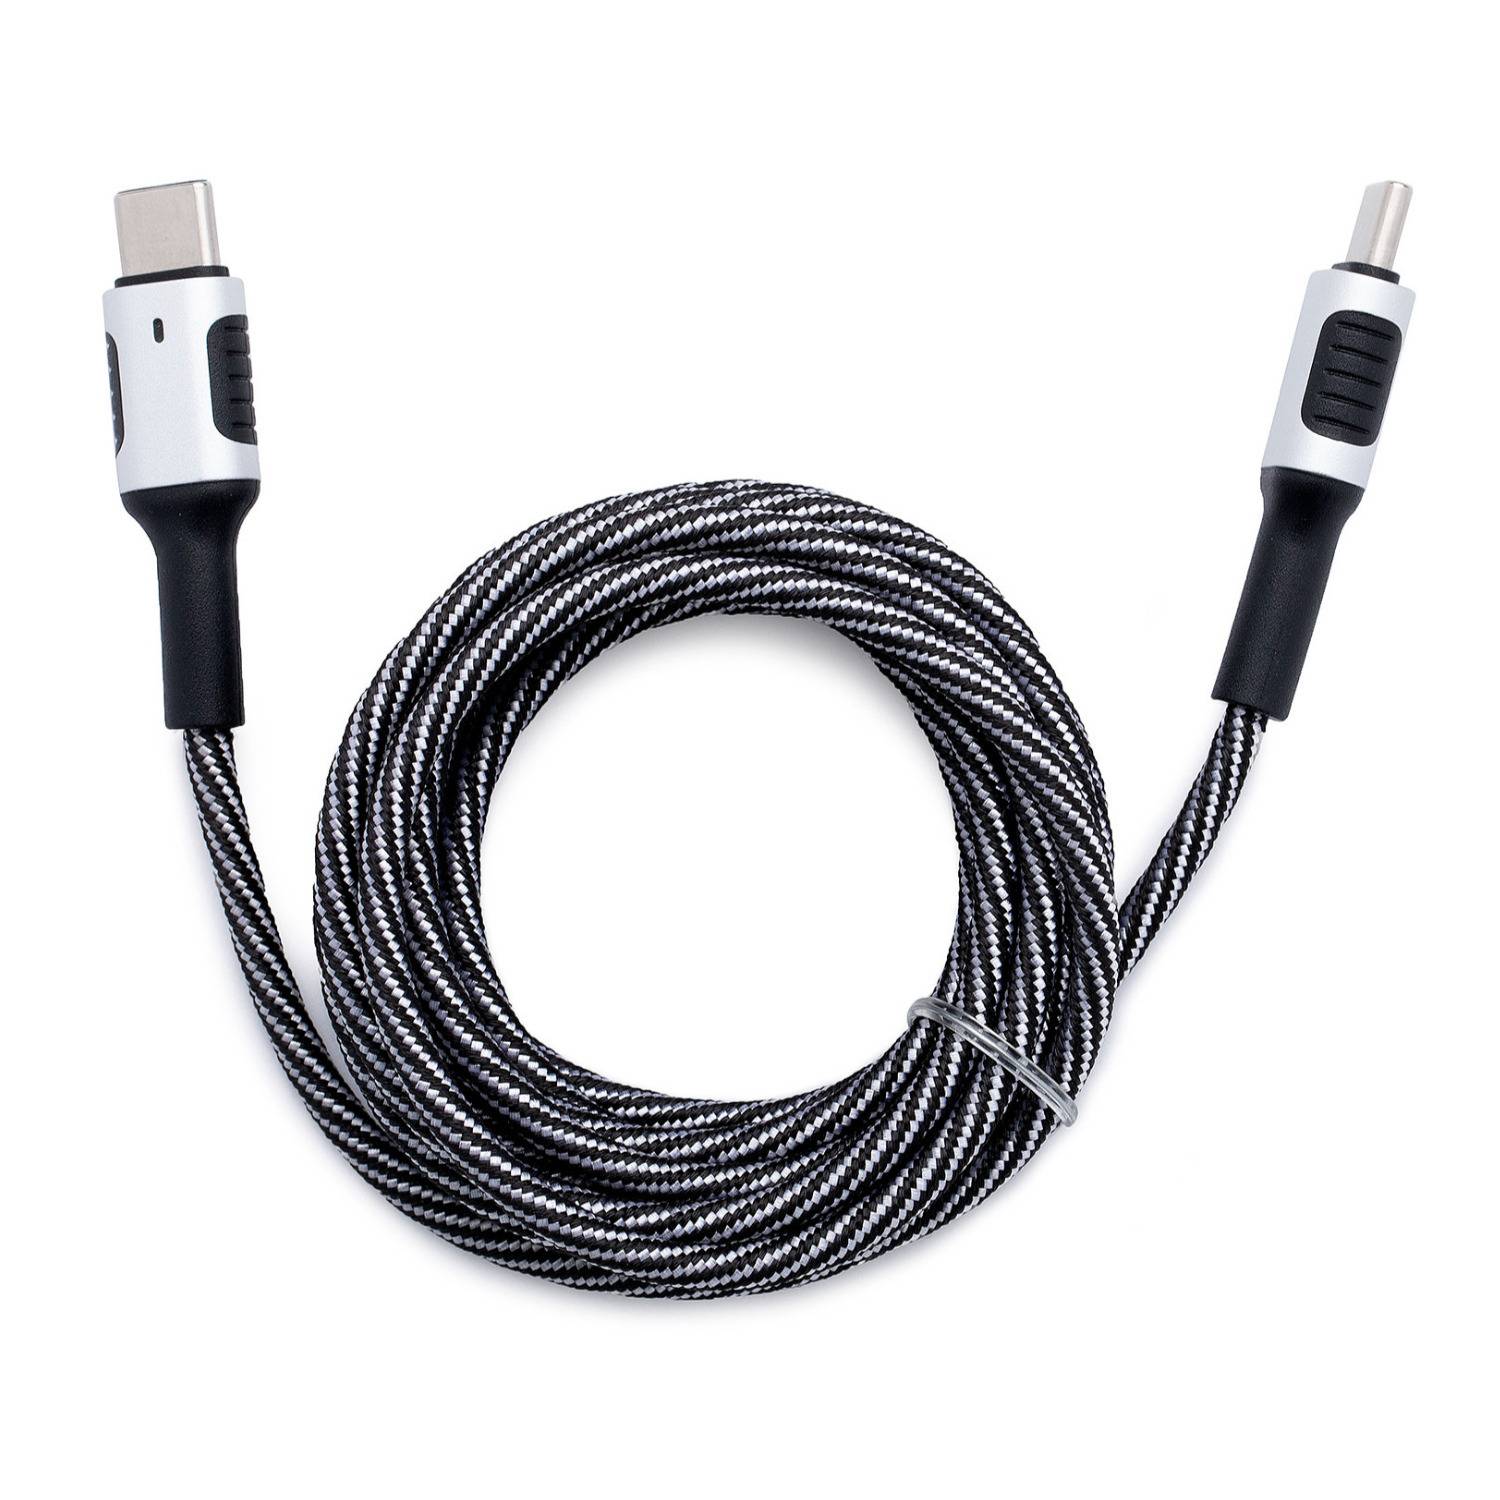 Kratos Power Nylon Braided Cable 6-Feet USB-C to USB-C Cable